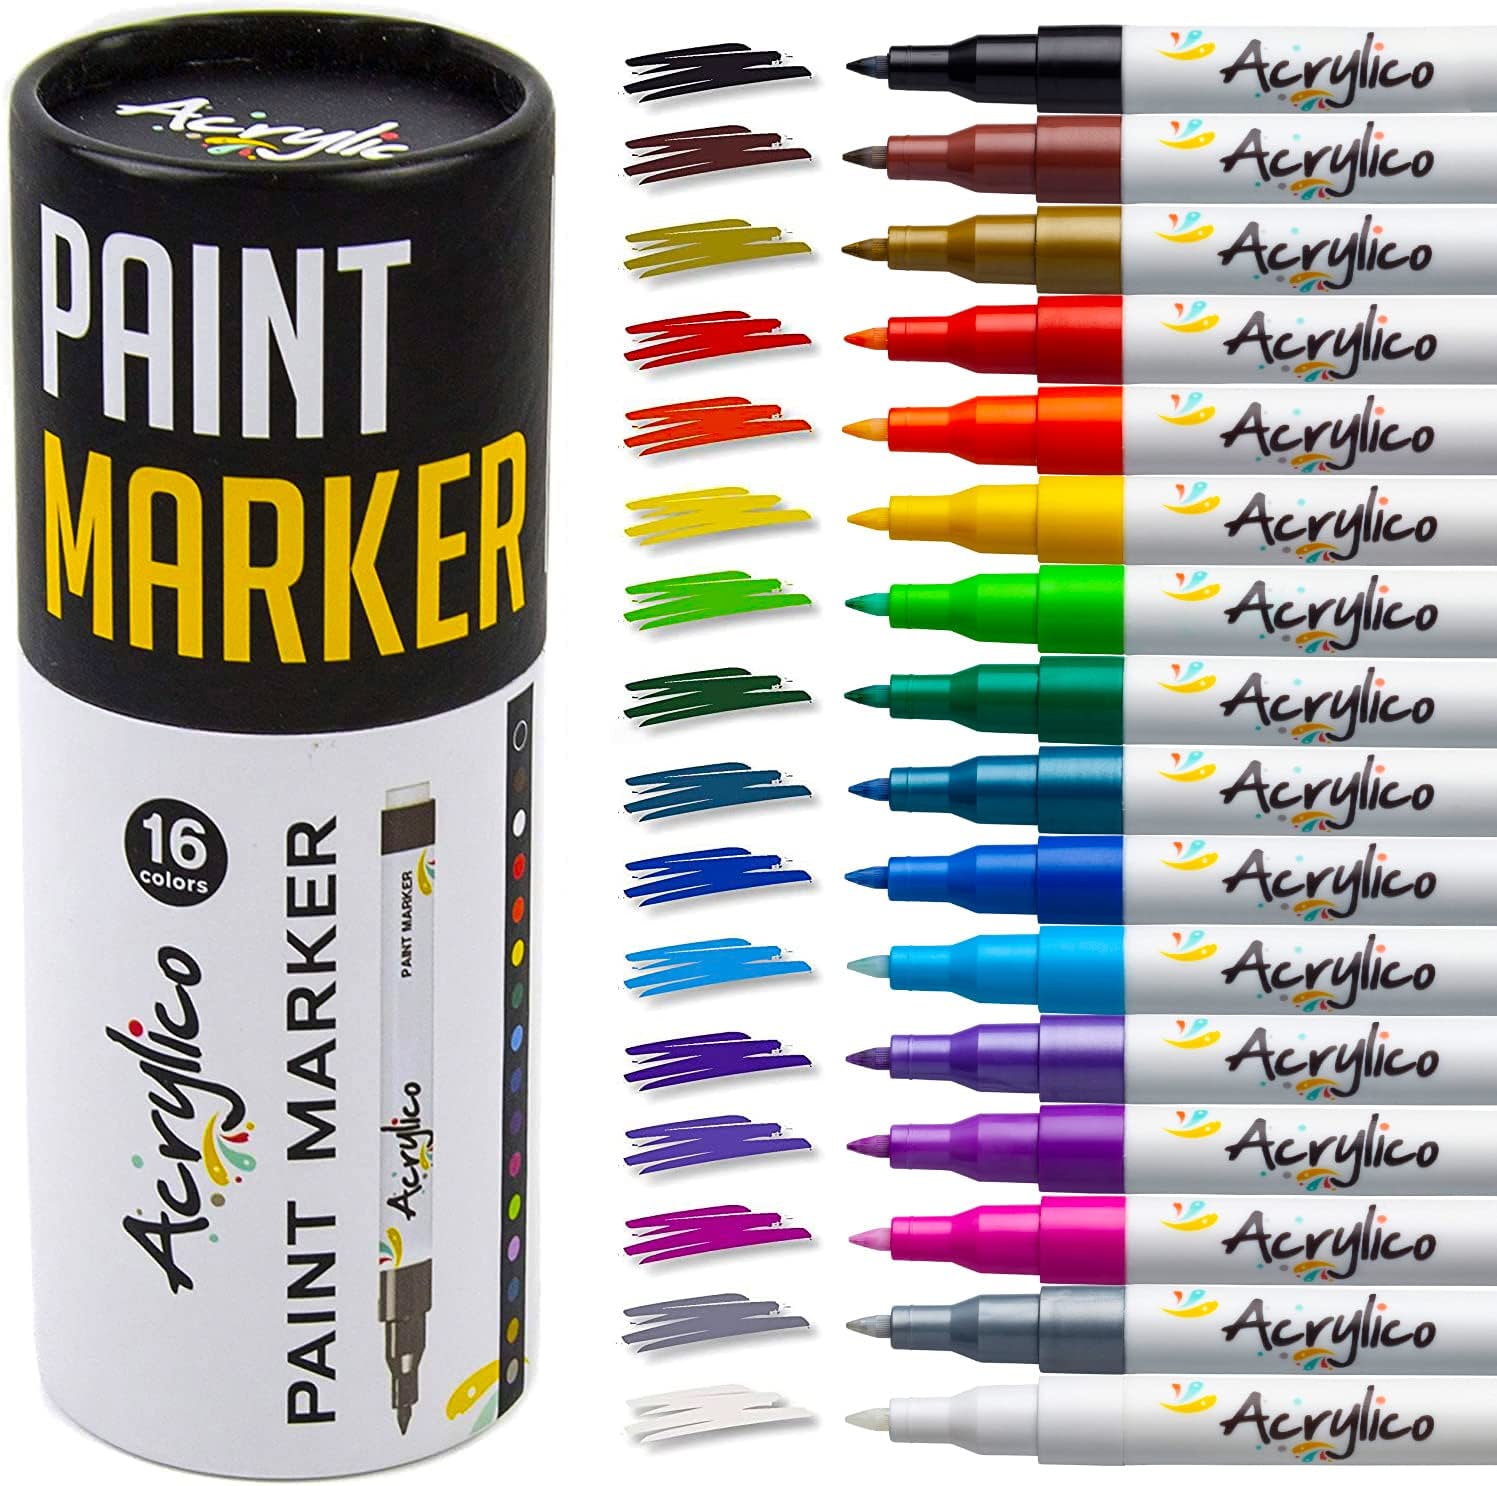 Snagshout  Acrylic Paint Markers Fine Tip, Paint Pens for Rock Painting,  Stone, Ceramic, Glass, Wood, Canvas, Kids Arts and Crafts Painting. Acrylic  Paint Set of 12 Colors